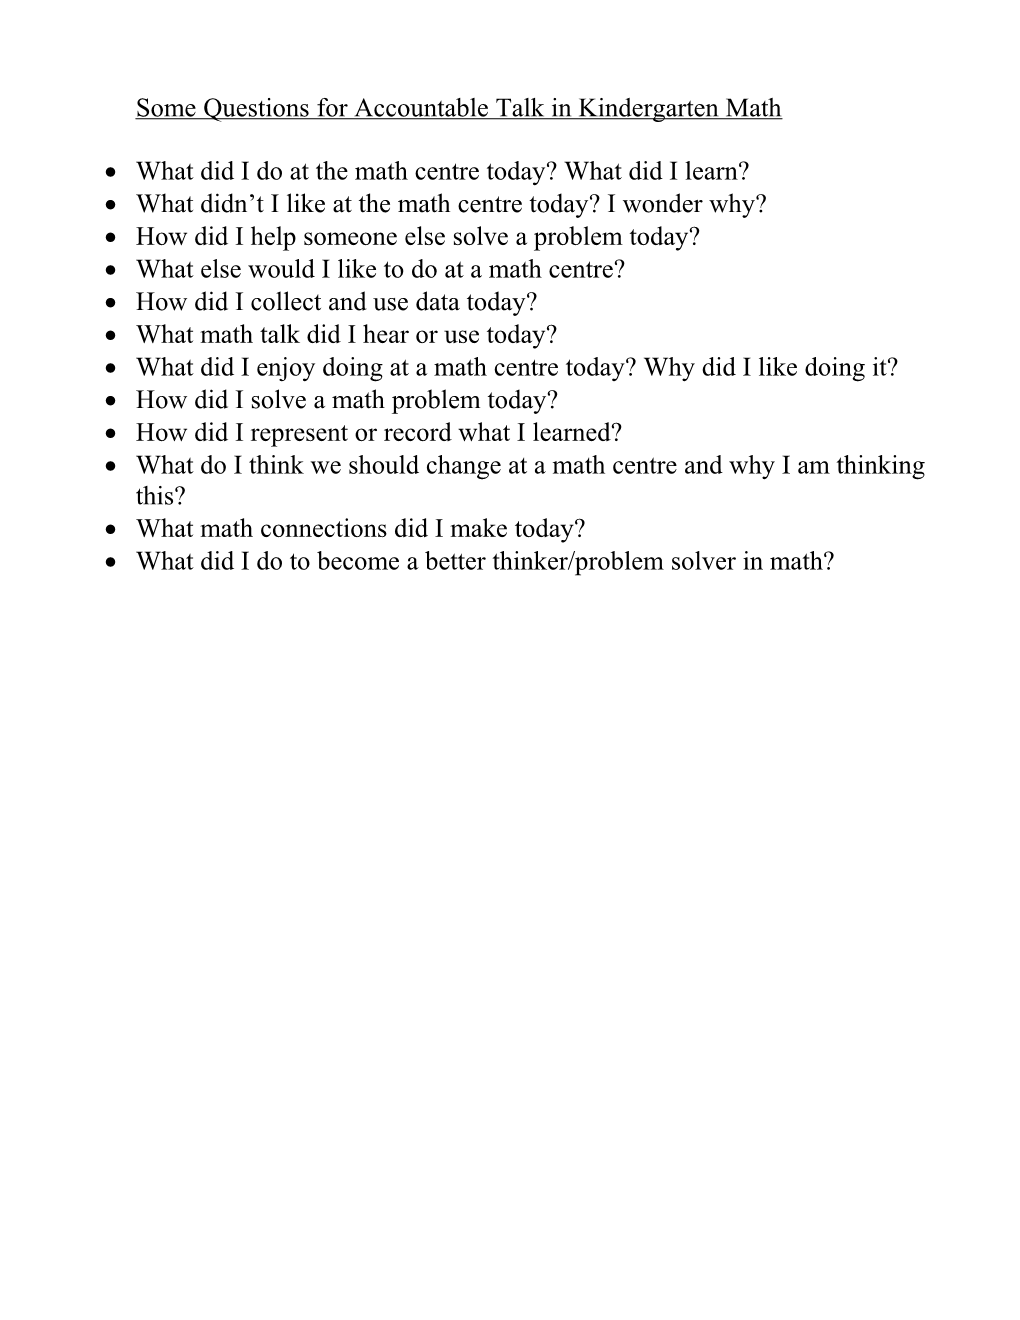 Some Questions For Accountable Talk In Kindergarten Math